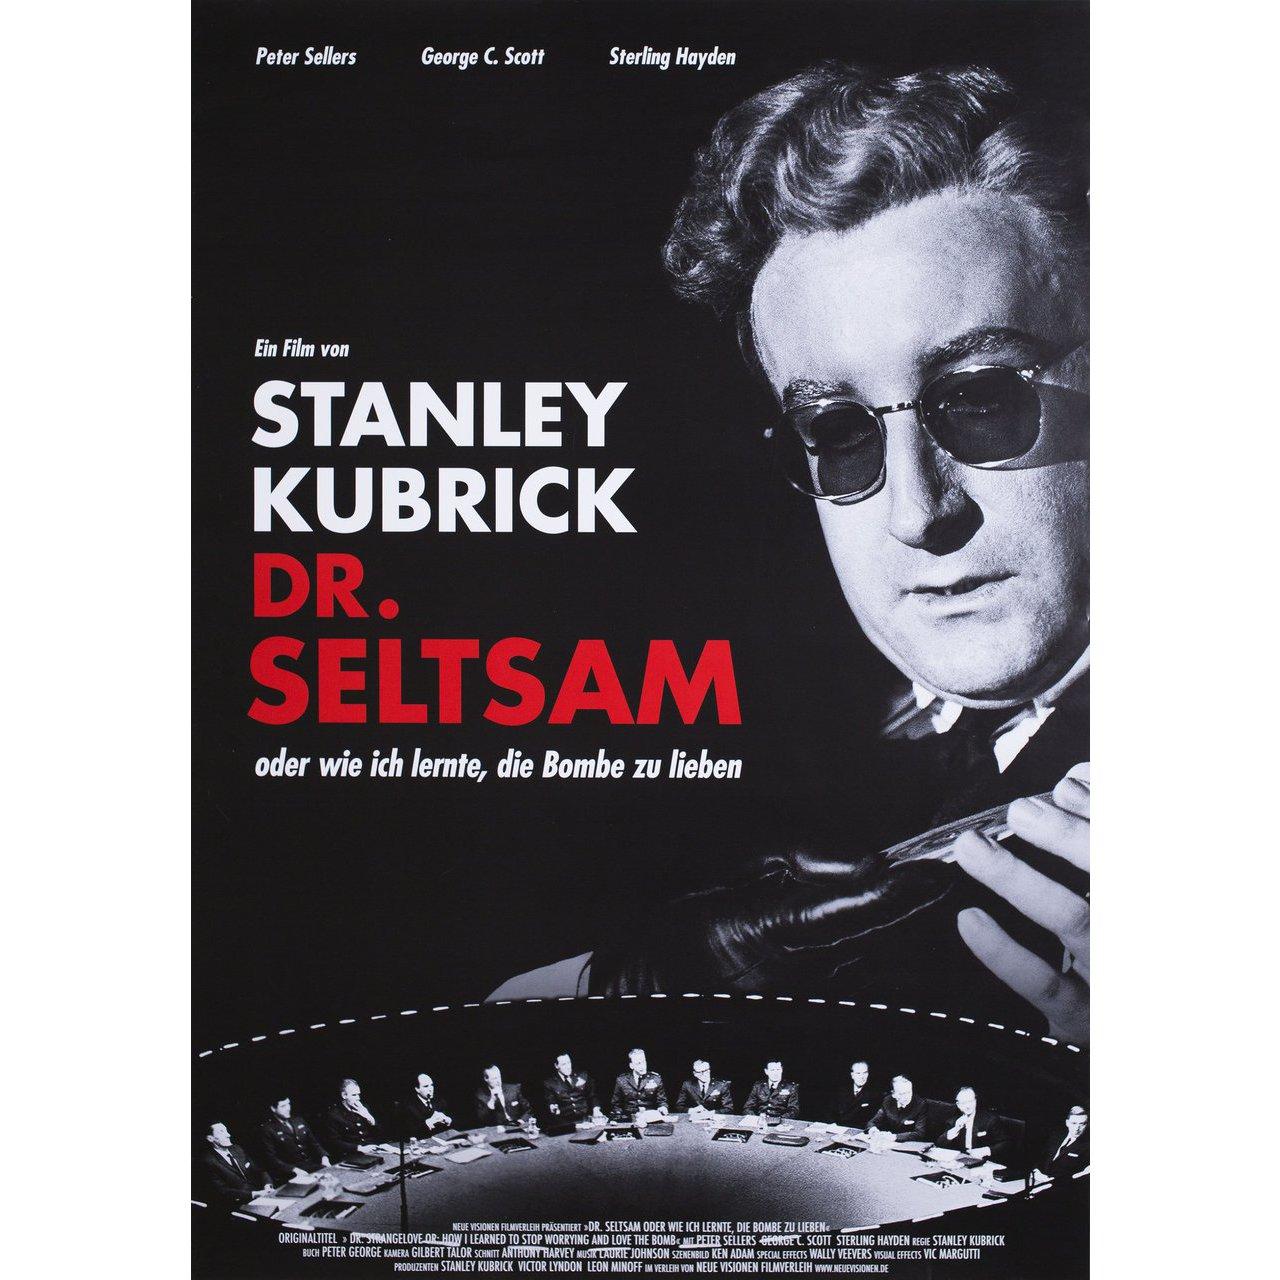 Original 2004 re-release German A1 poster for the 1964 film Dr. Strangelove (Dr. Strangelove or: How I Learned to Stop Worrying and Love the Bomb) directed by Stanley Kubrick with Peter Sellers / George C. Scott / Sterling Hayden / Keenan Wynn. Fine